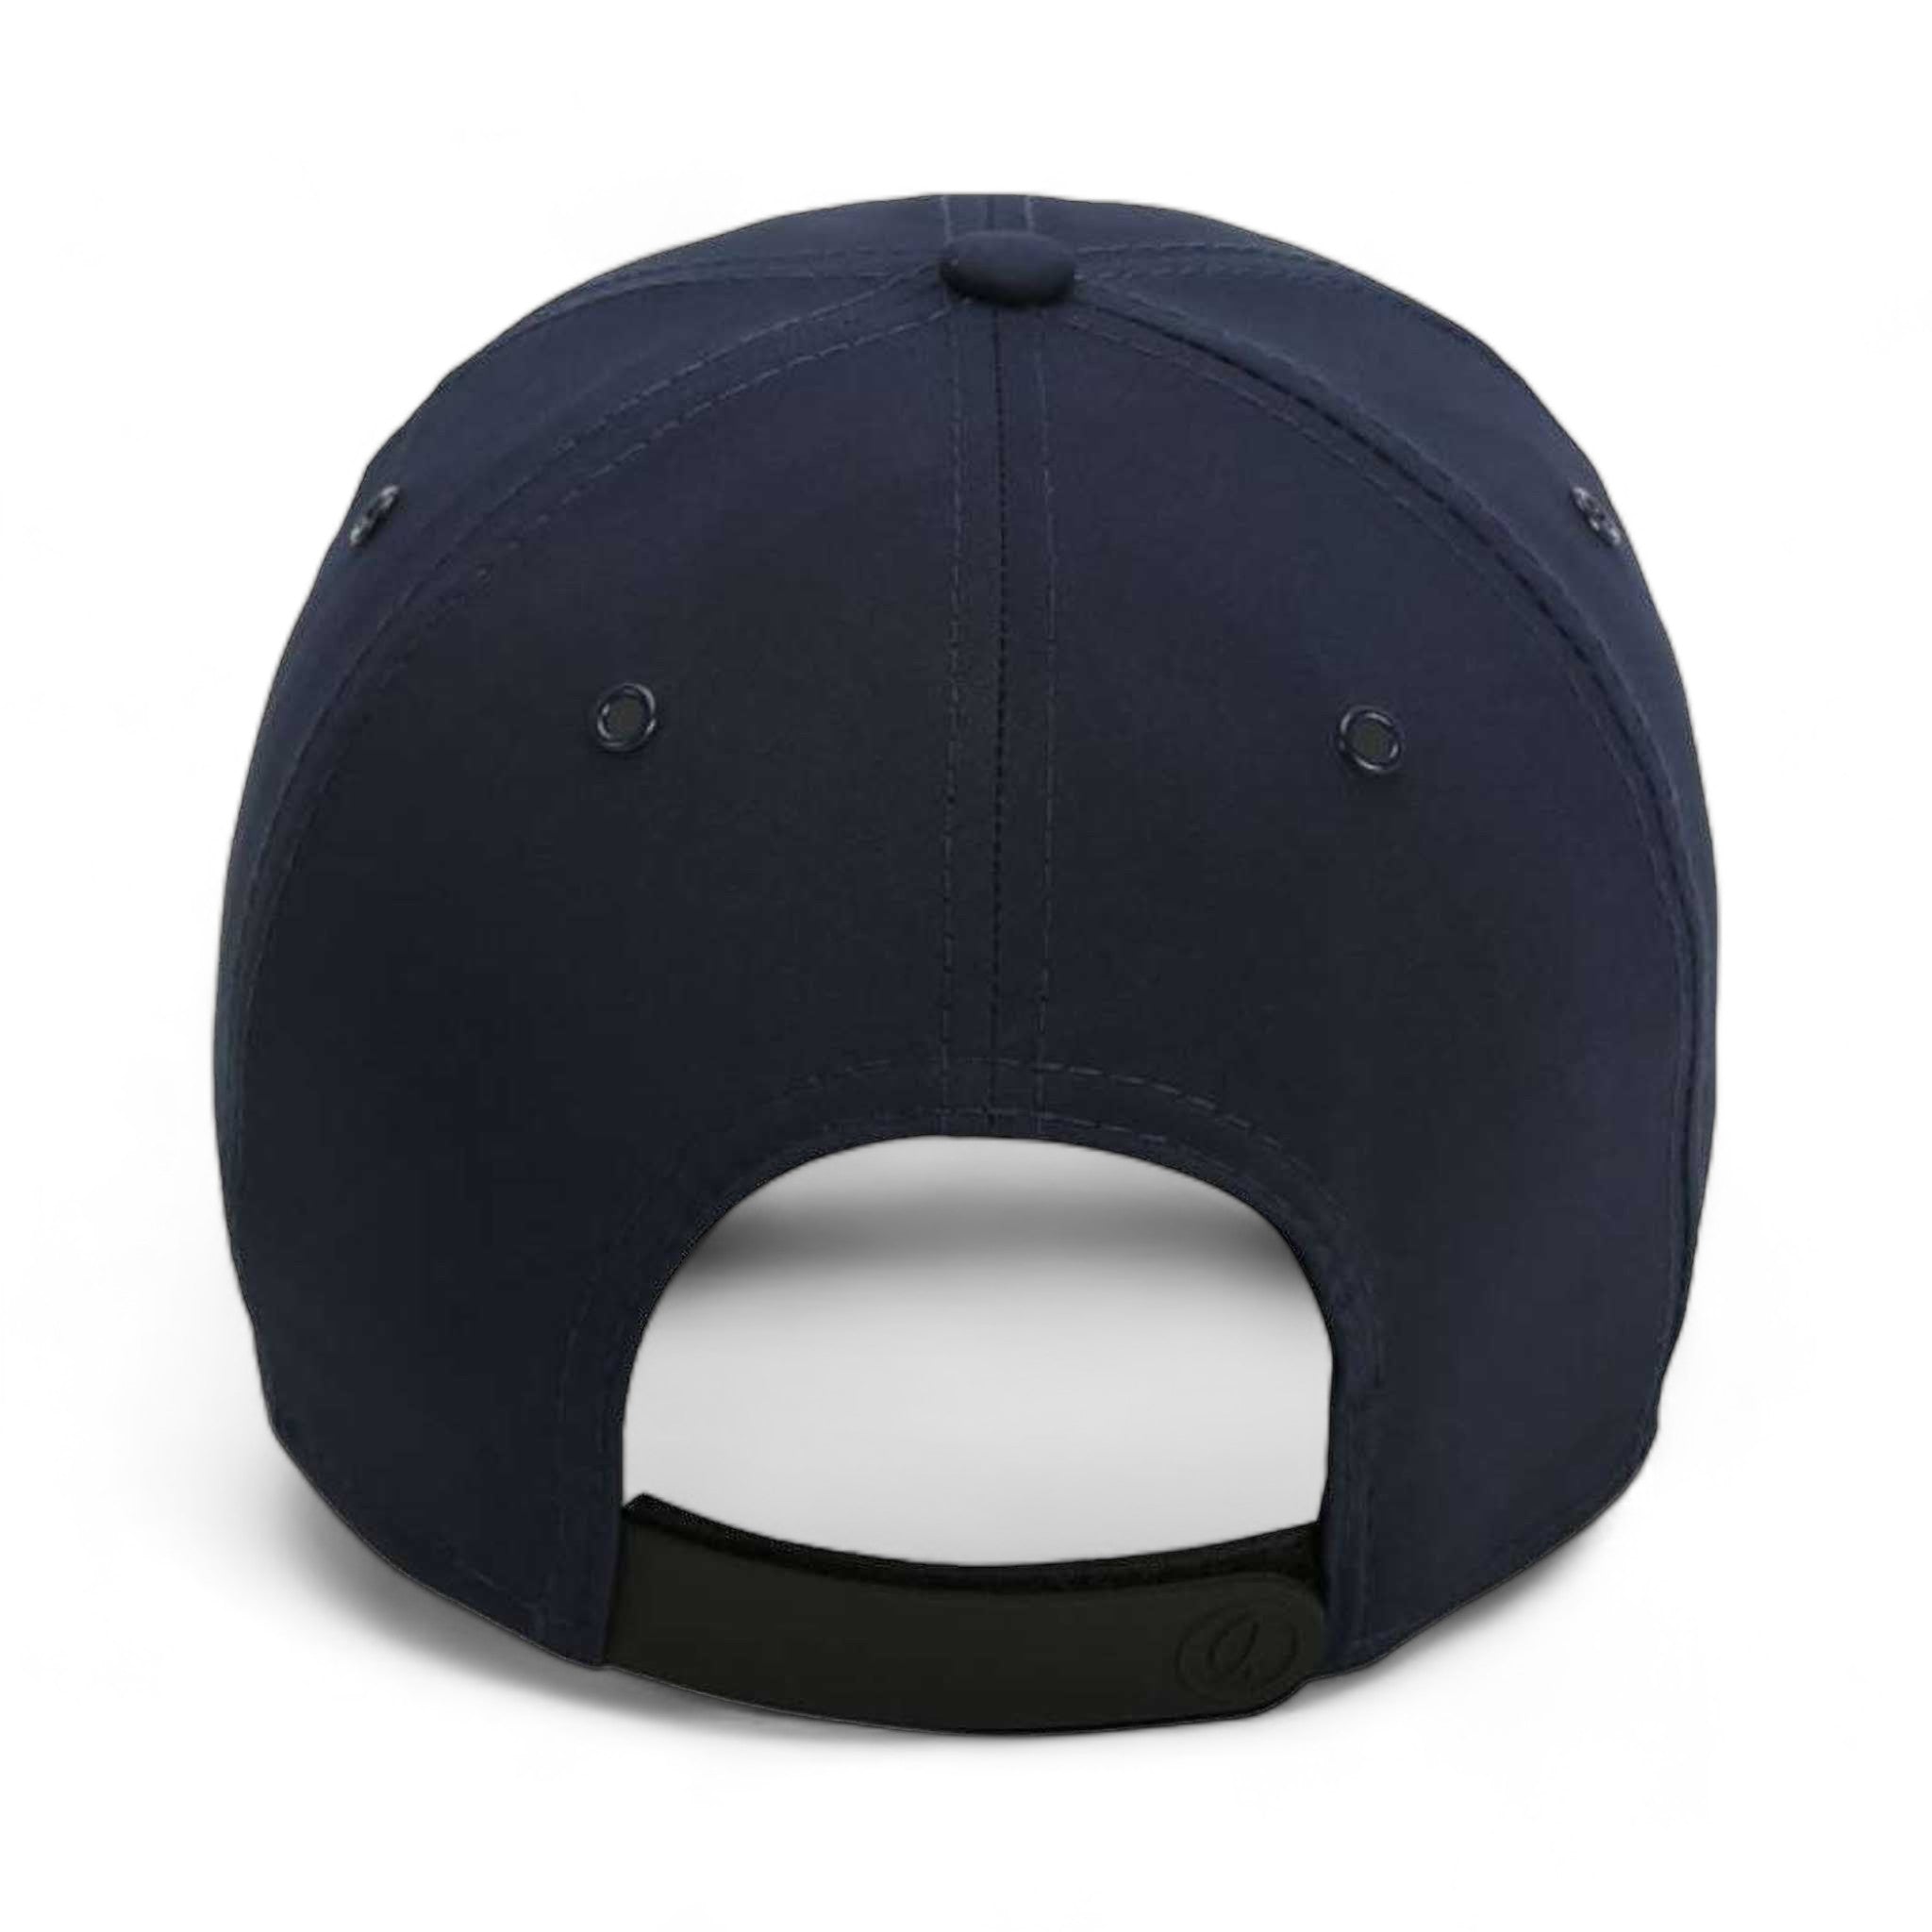 Back view of Imperial 6054 custom hat in navy